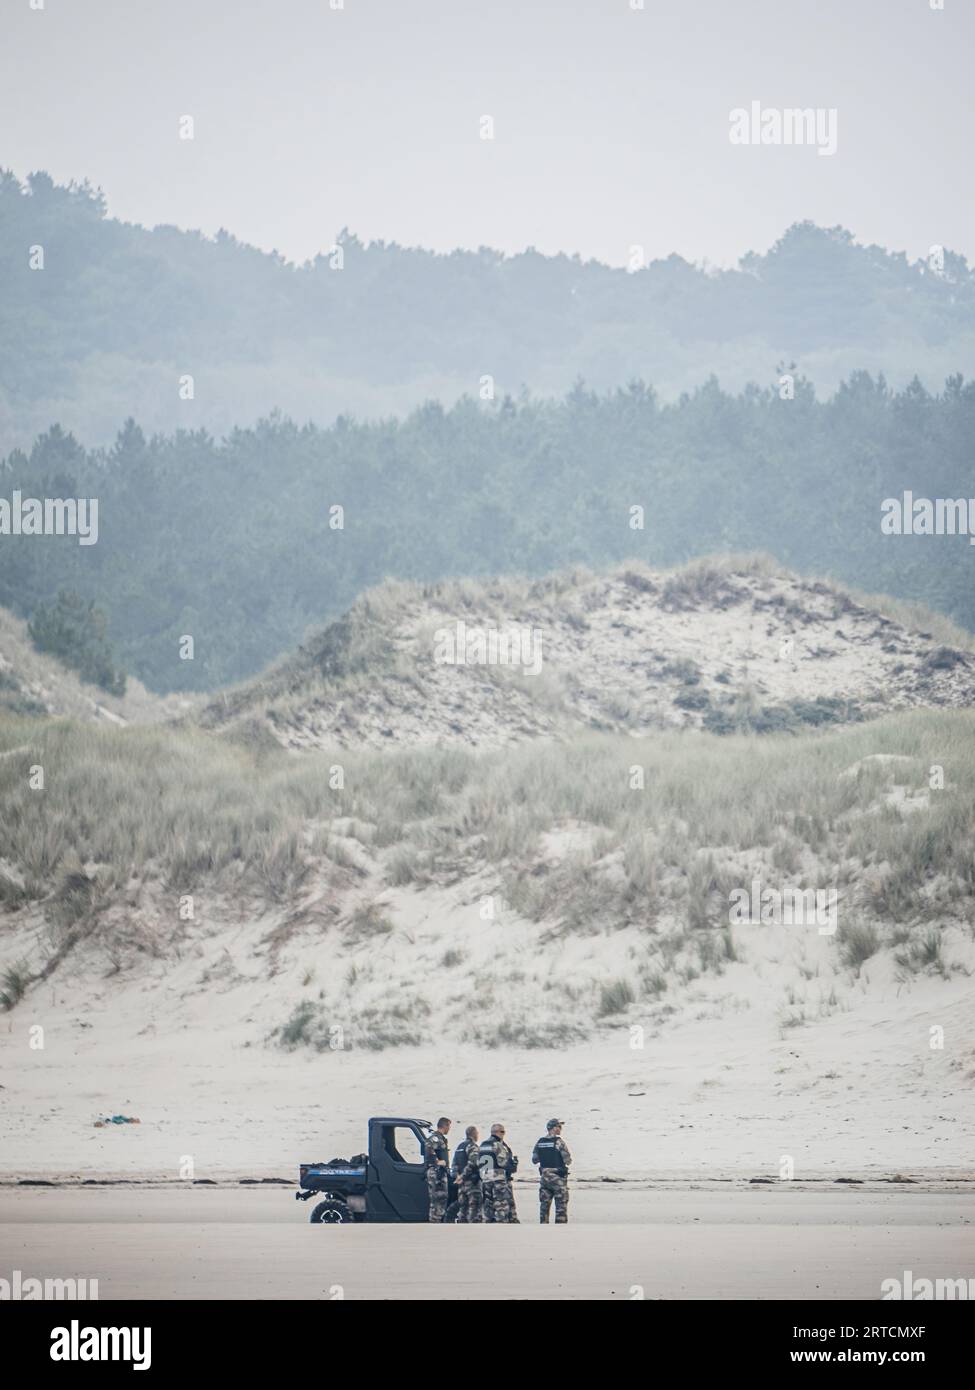 Neufchatel-Hardelot, France - Aug 18, 2023: In Neufchatel-Hardelot, French police officers and gendarmes maintain vigilant surveillance over the dunes and the beach to ensure the illegal migration Stock Photo